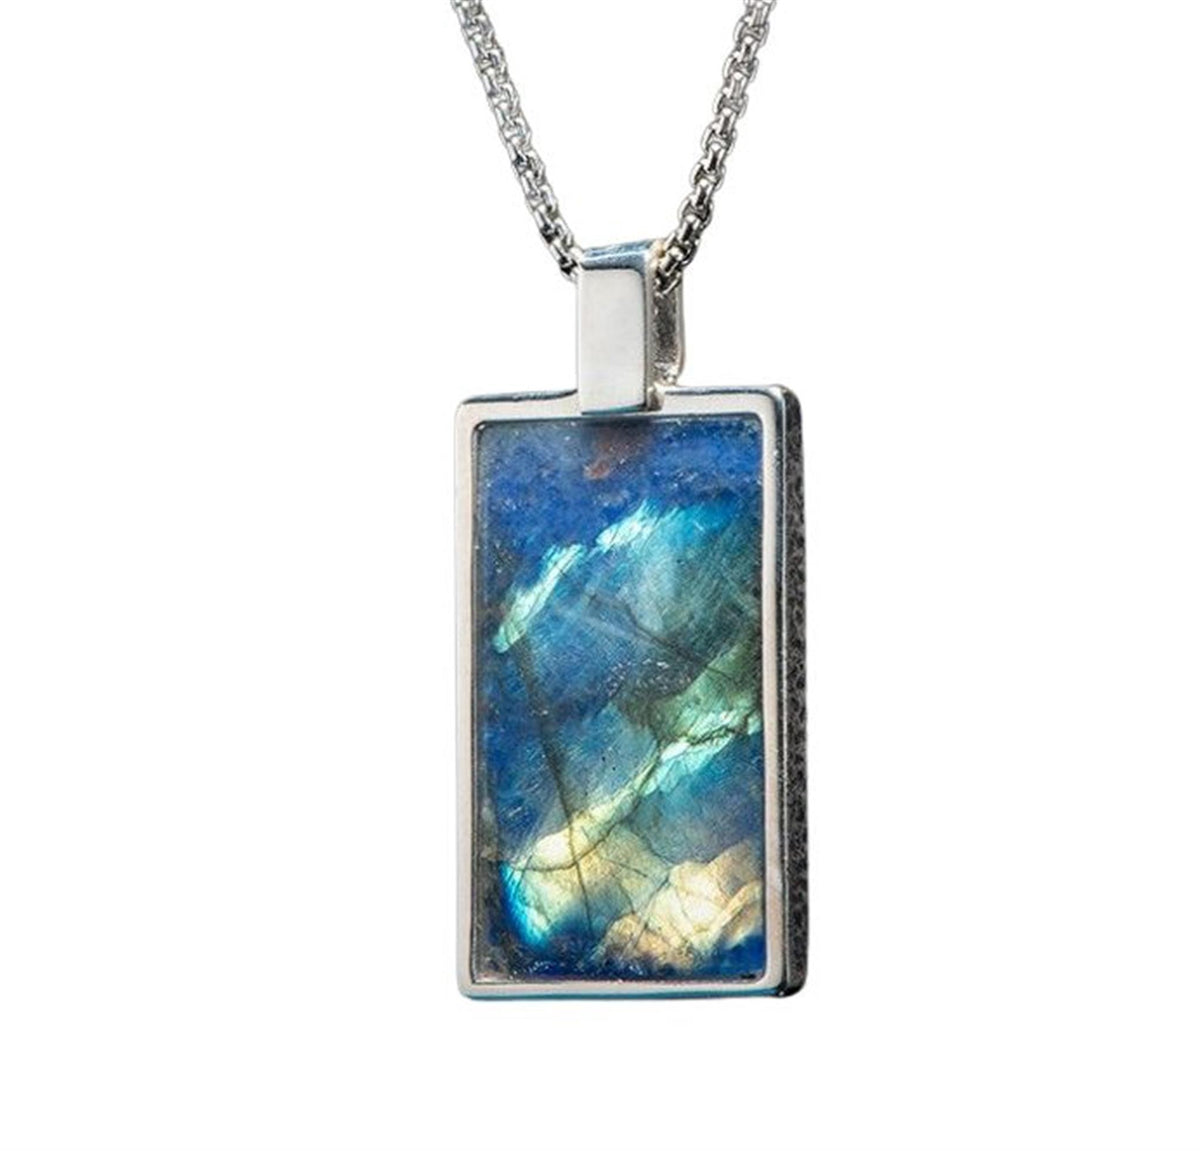 William Henry - Labradorite Pinnacle Shift Pendant on 22" Sterling Silver Chain